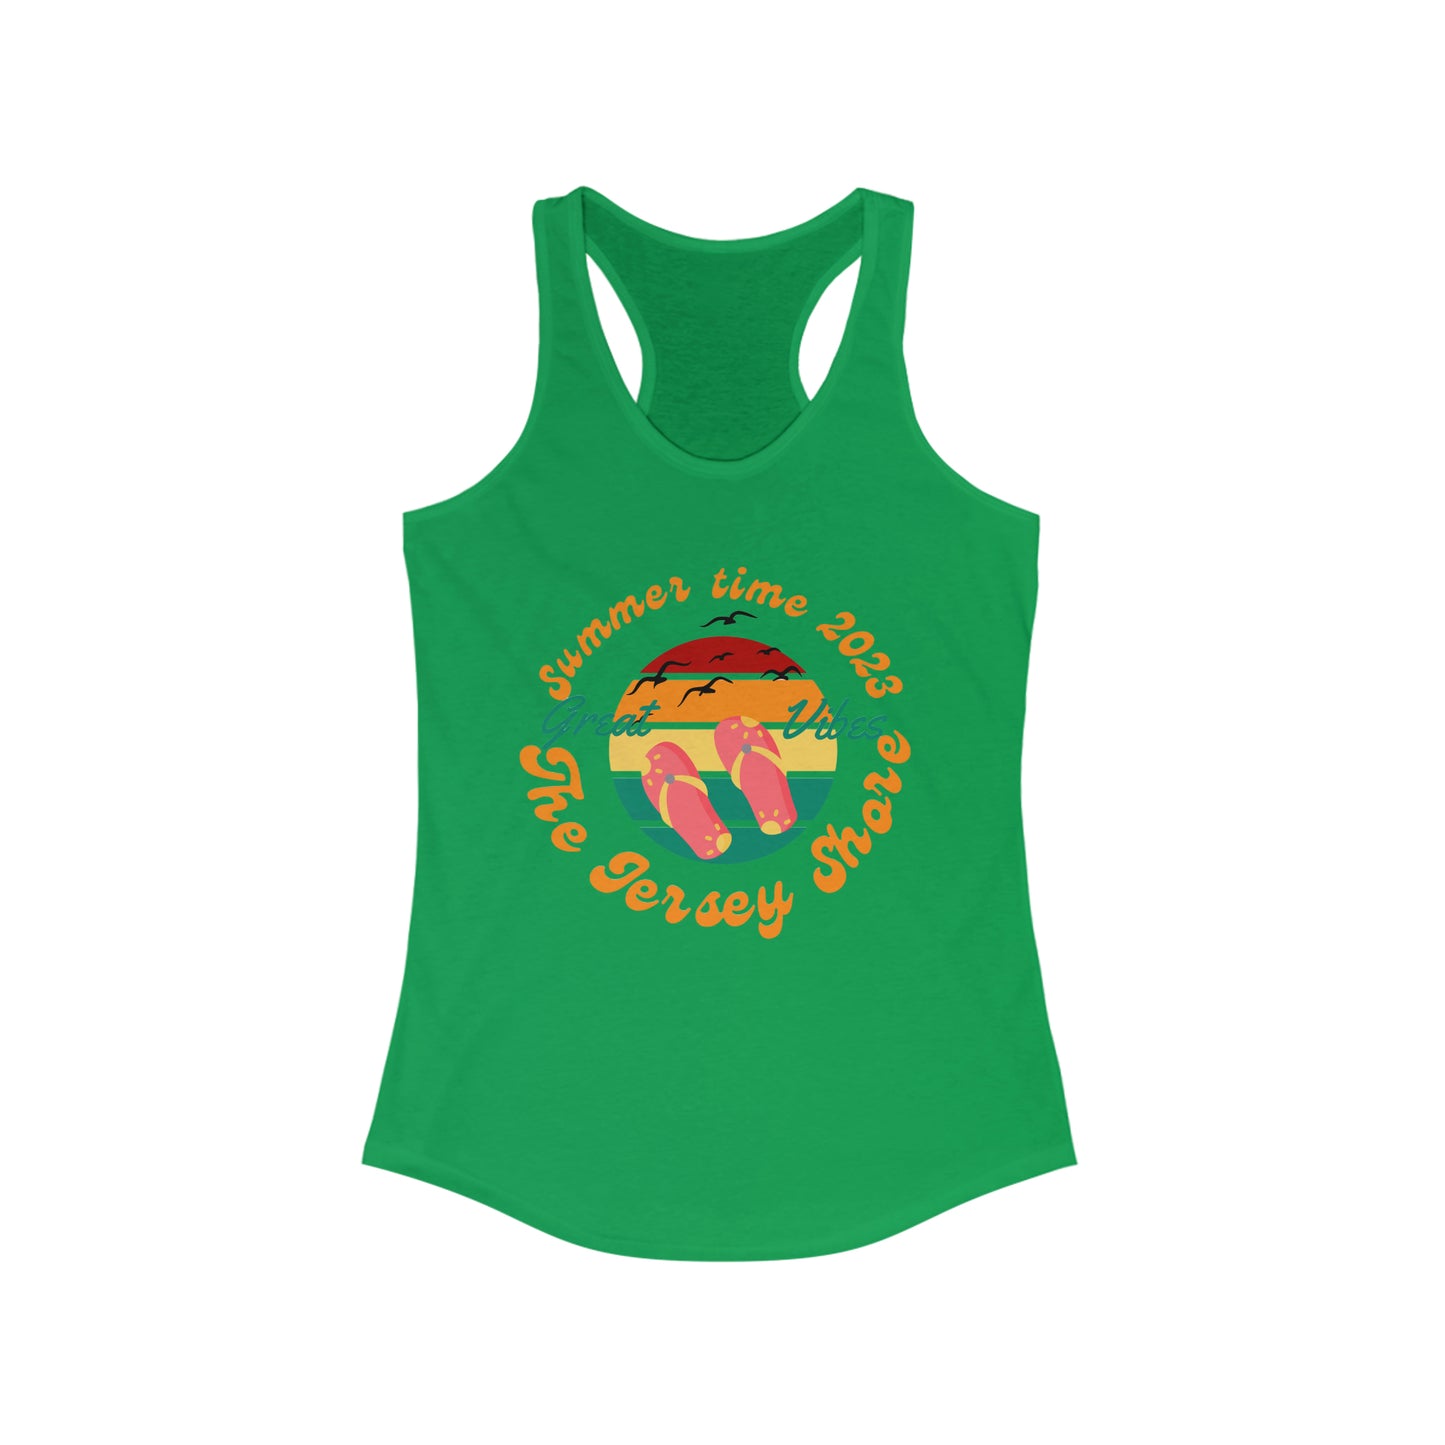 ‘Summer Vibes. Turn it out! Printed Front & Back.  Women's Ideal Racerback Tank